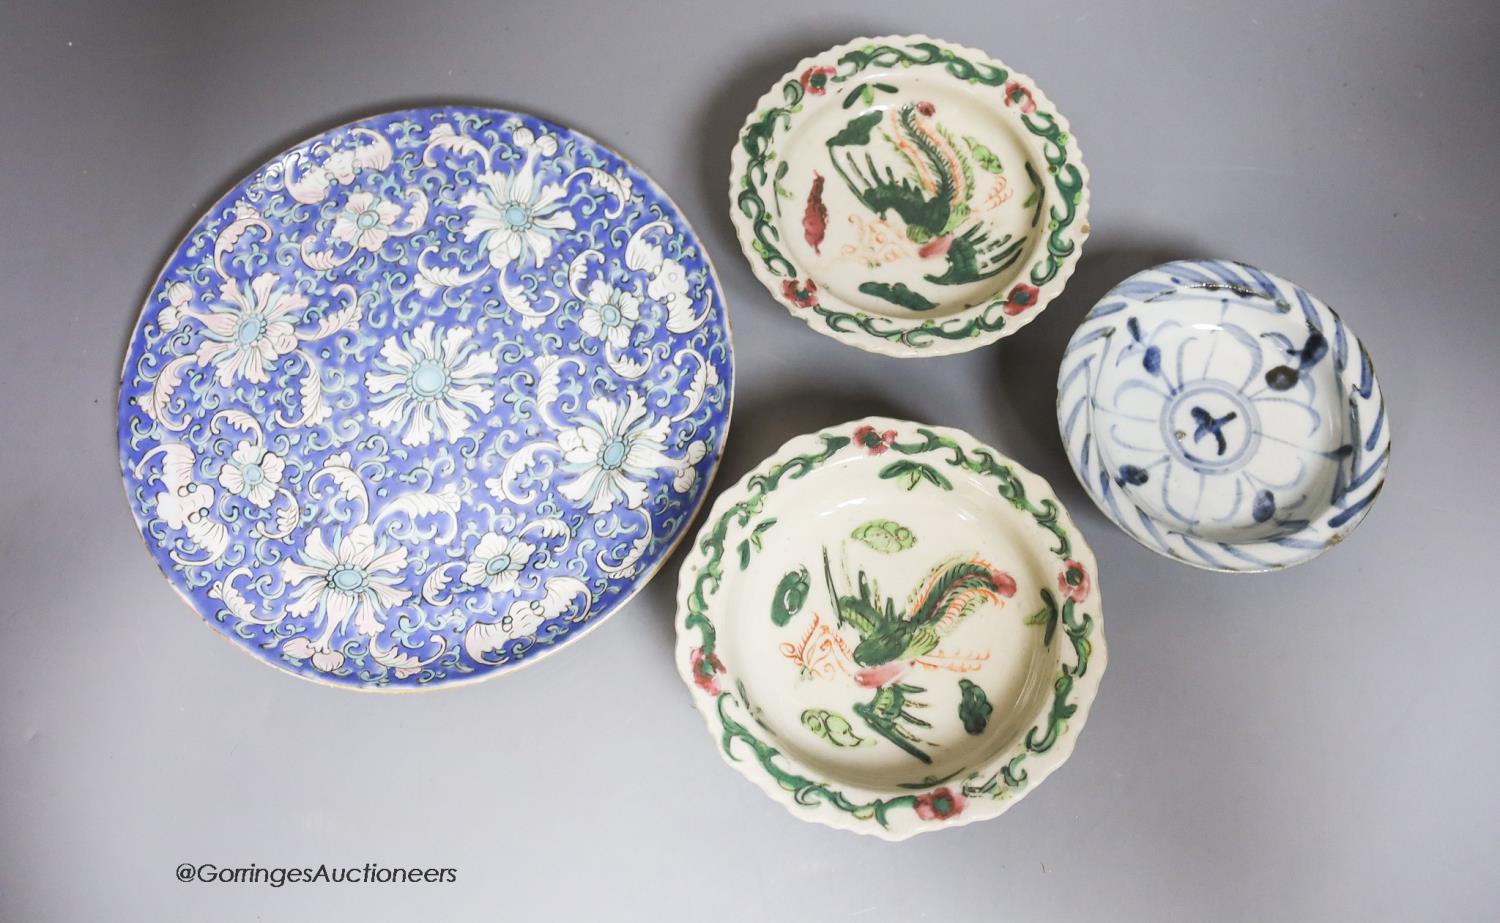 A pair of Chinese stem dishes, a blue-and-white stem dish and a 19th-century Chinese enamelled